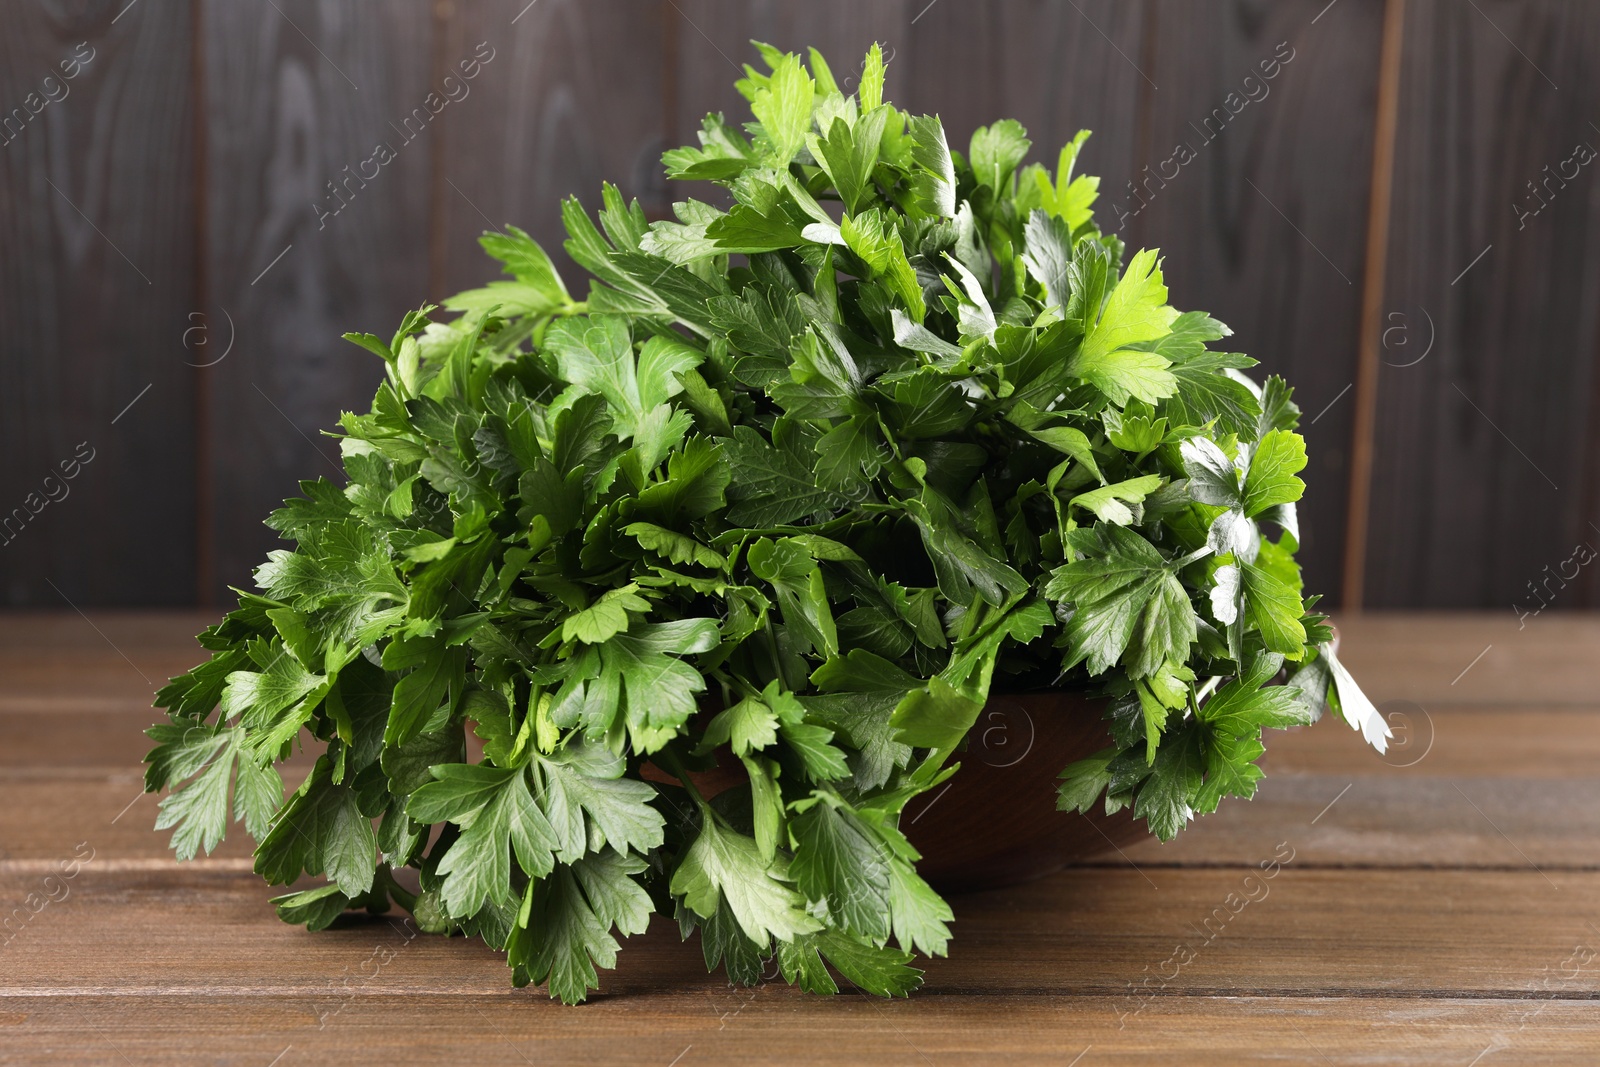 Photo of Bunch of fresh parsley on wooden table